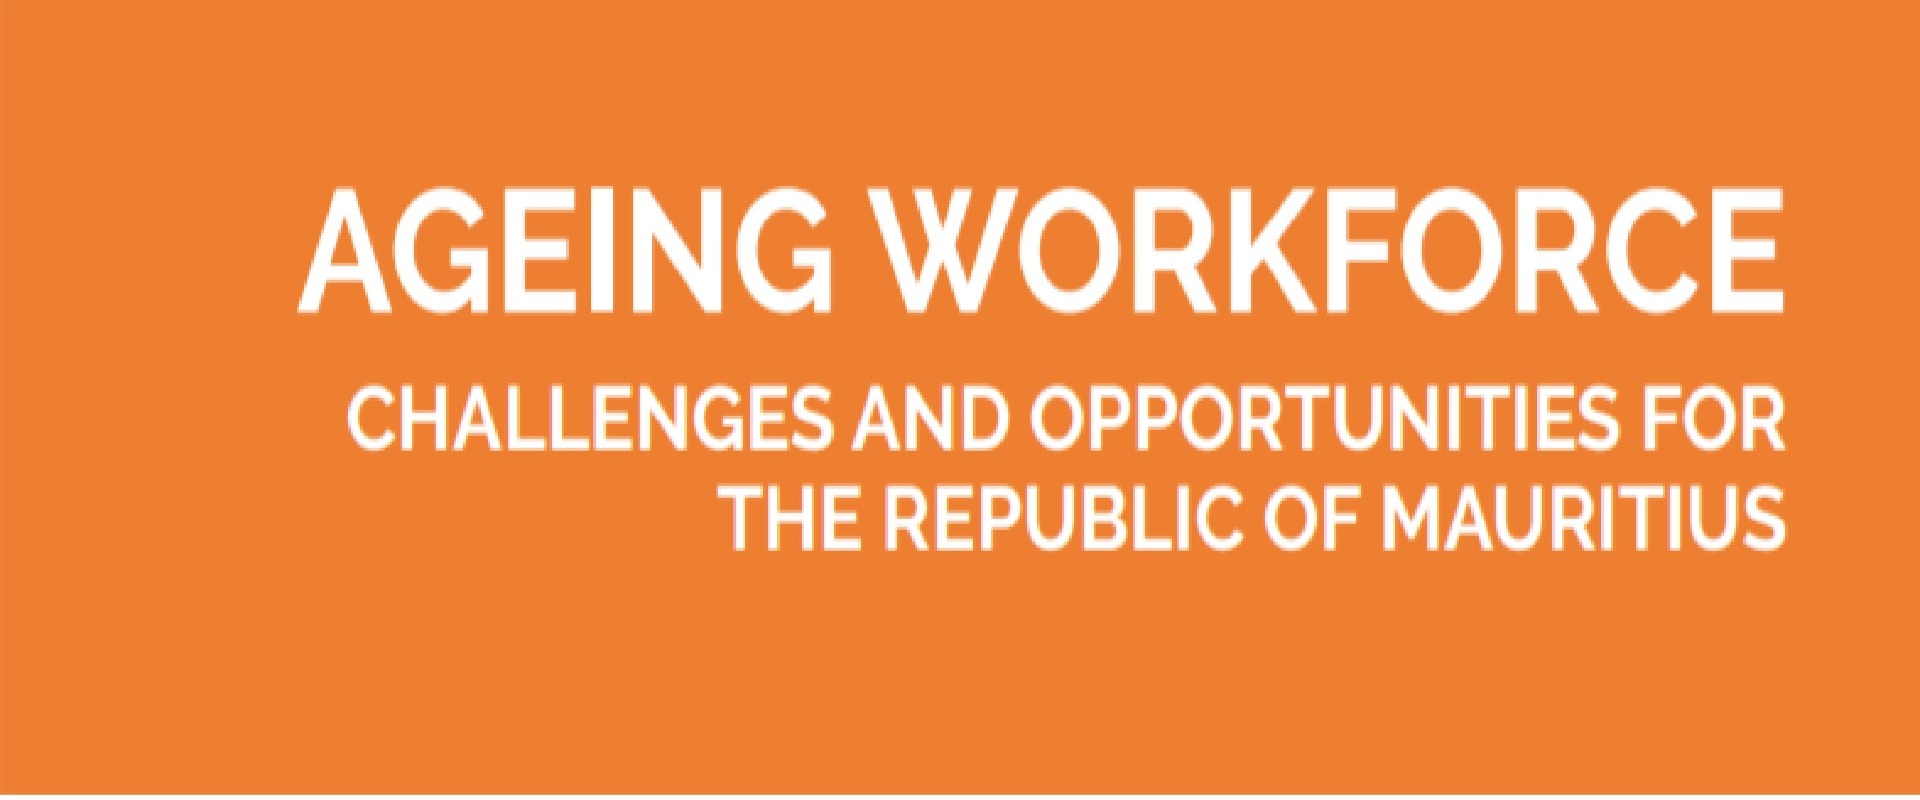 Ageing Workforce: Challenges and Opportunities for the Republic of Mauritius